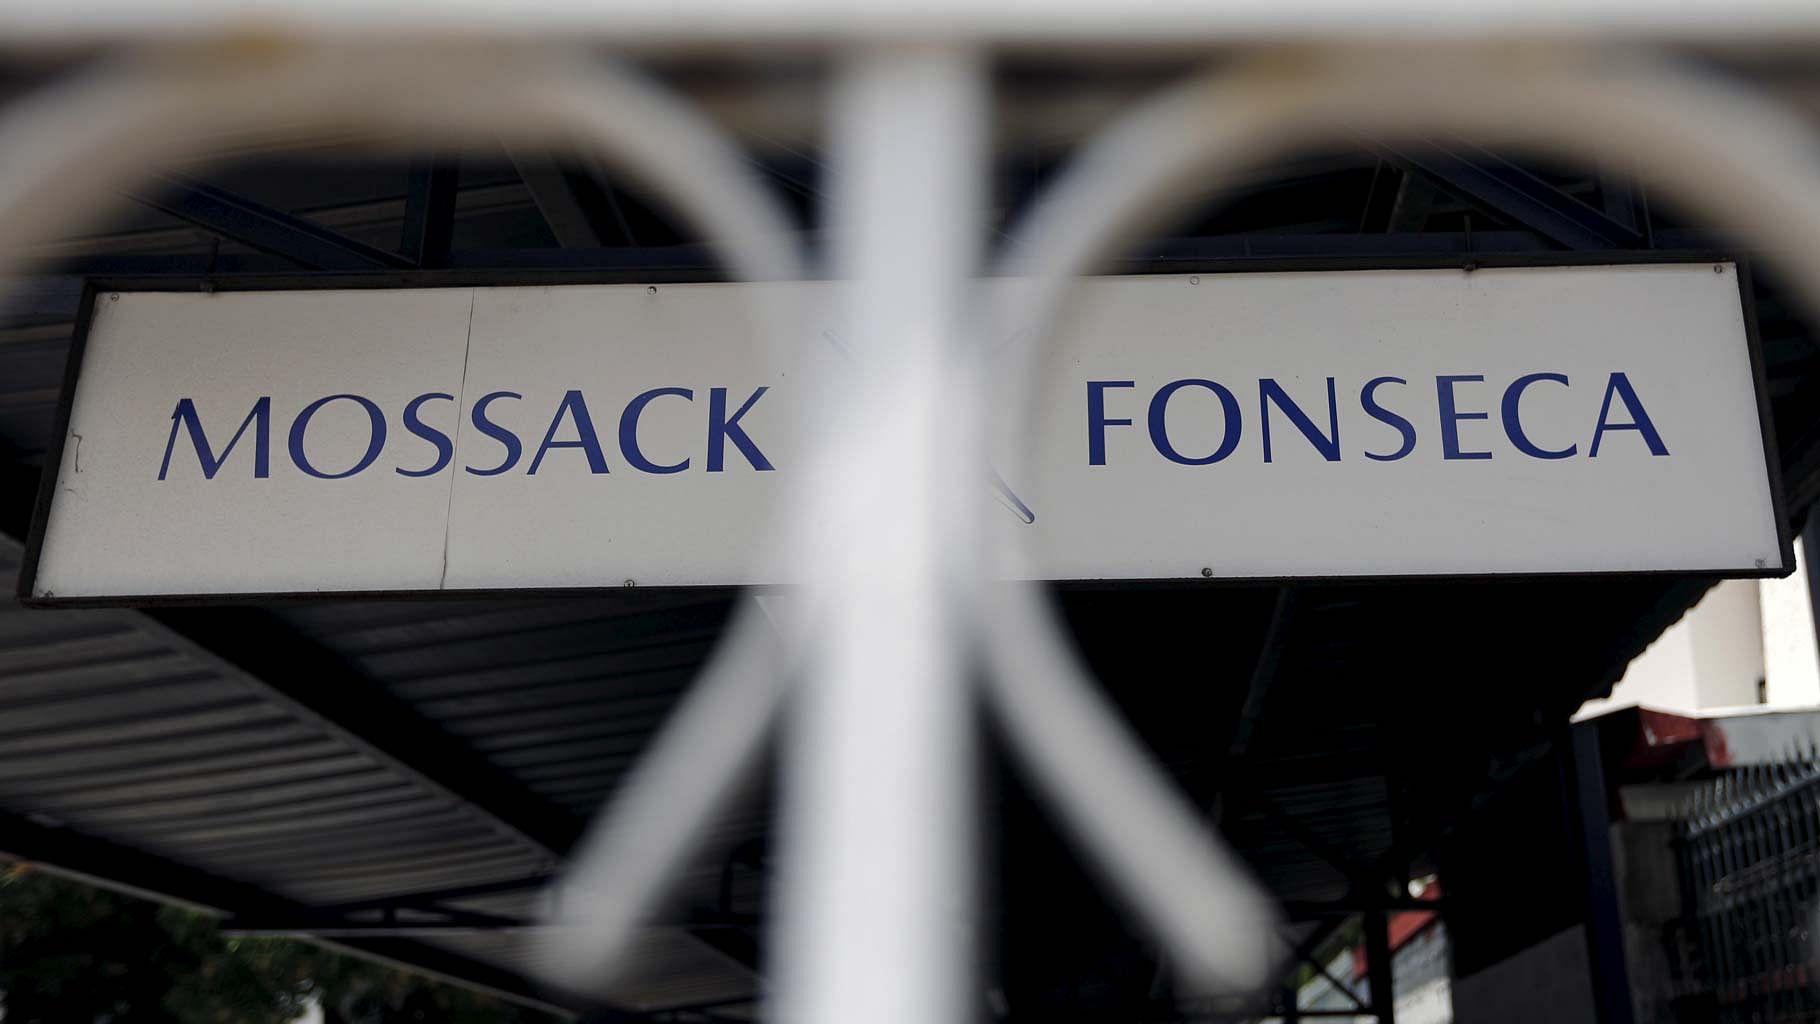 Panama Papers, which consist of millions of documents stolen from Mossack Fonseca and leaked to the media in April 2016.